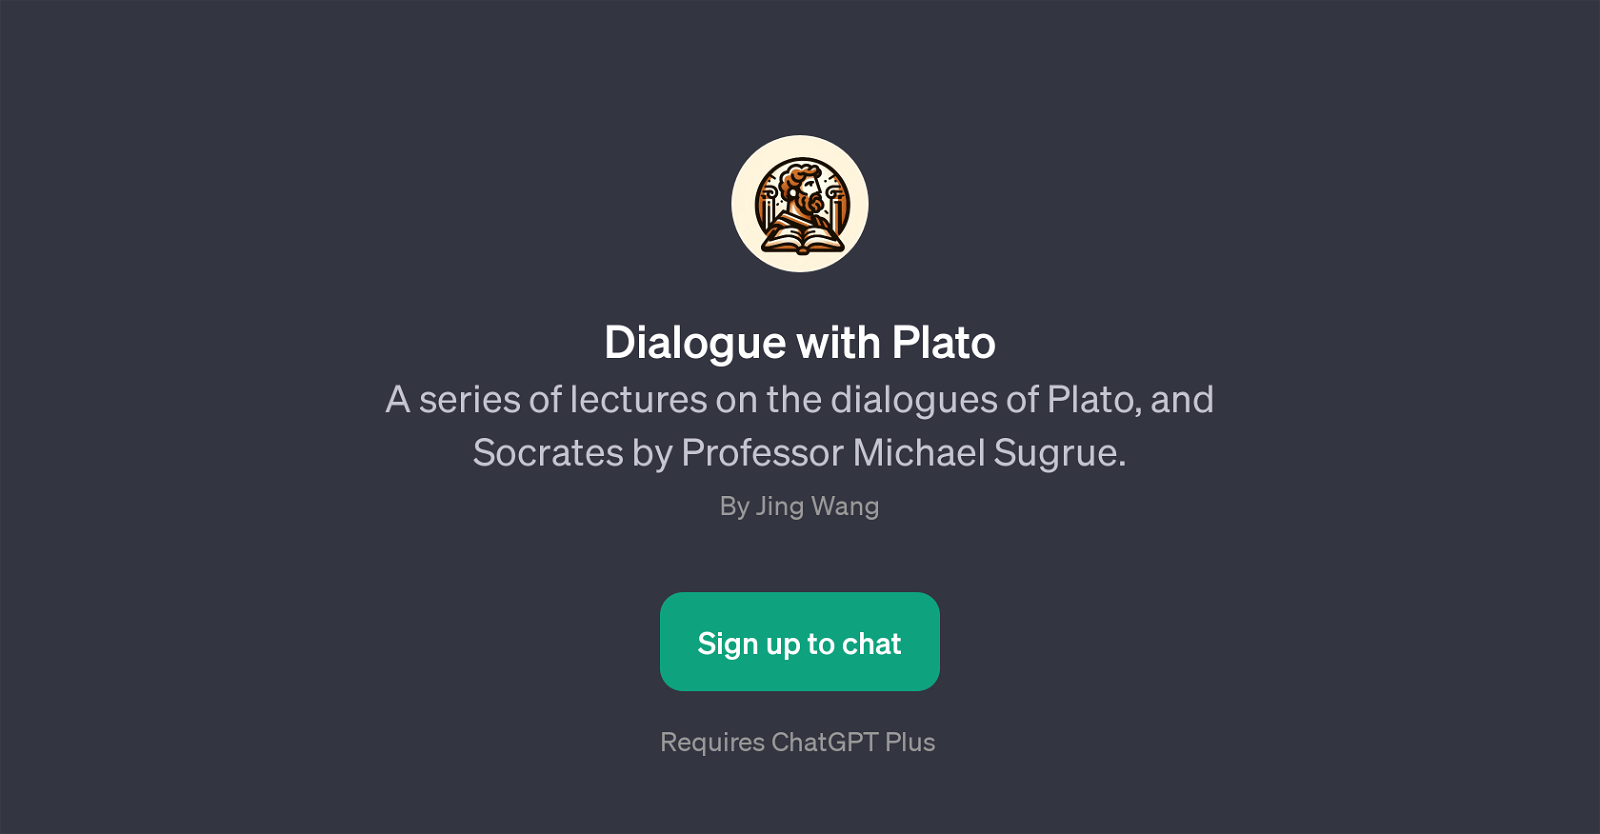 Dialogue with Plato website